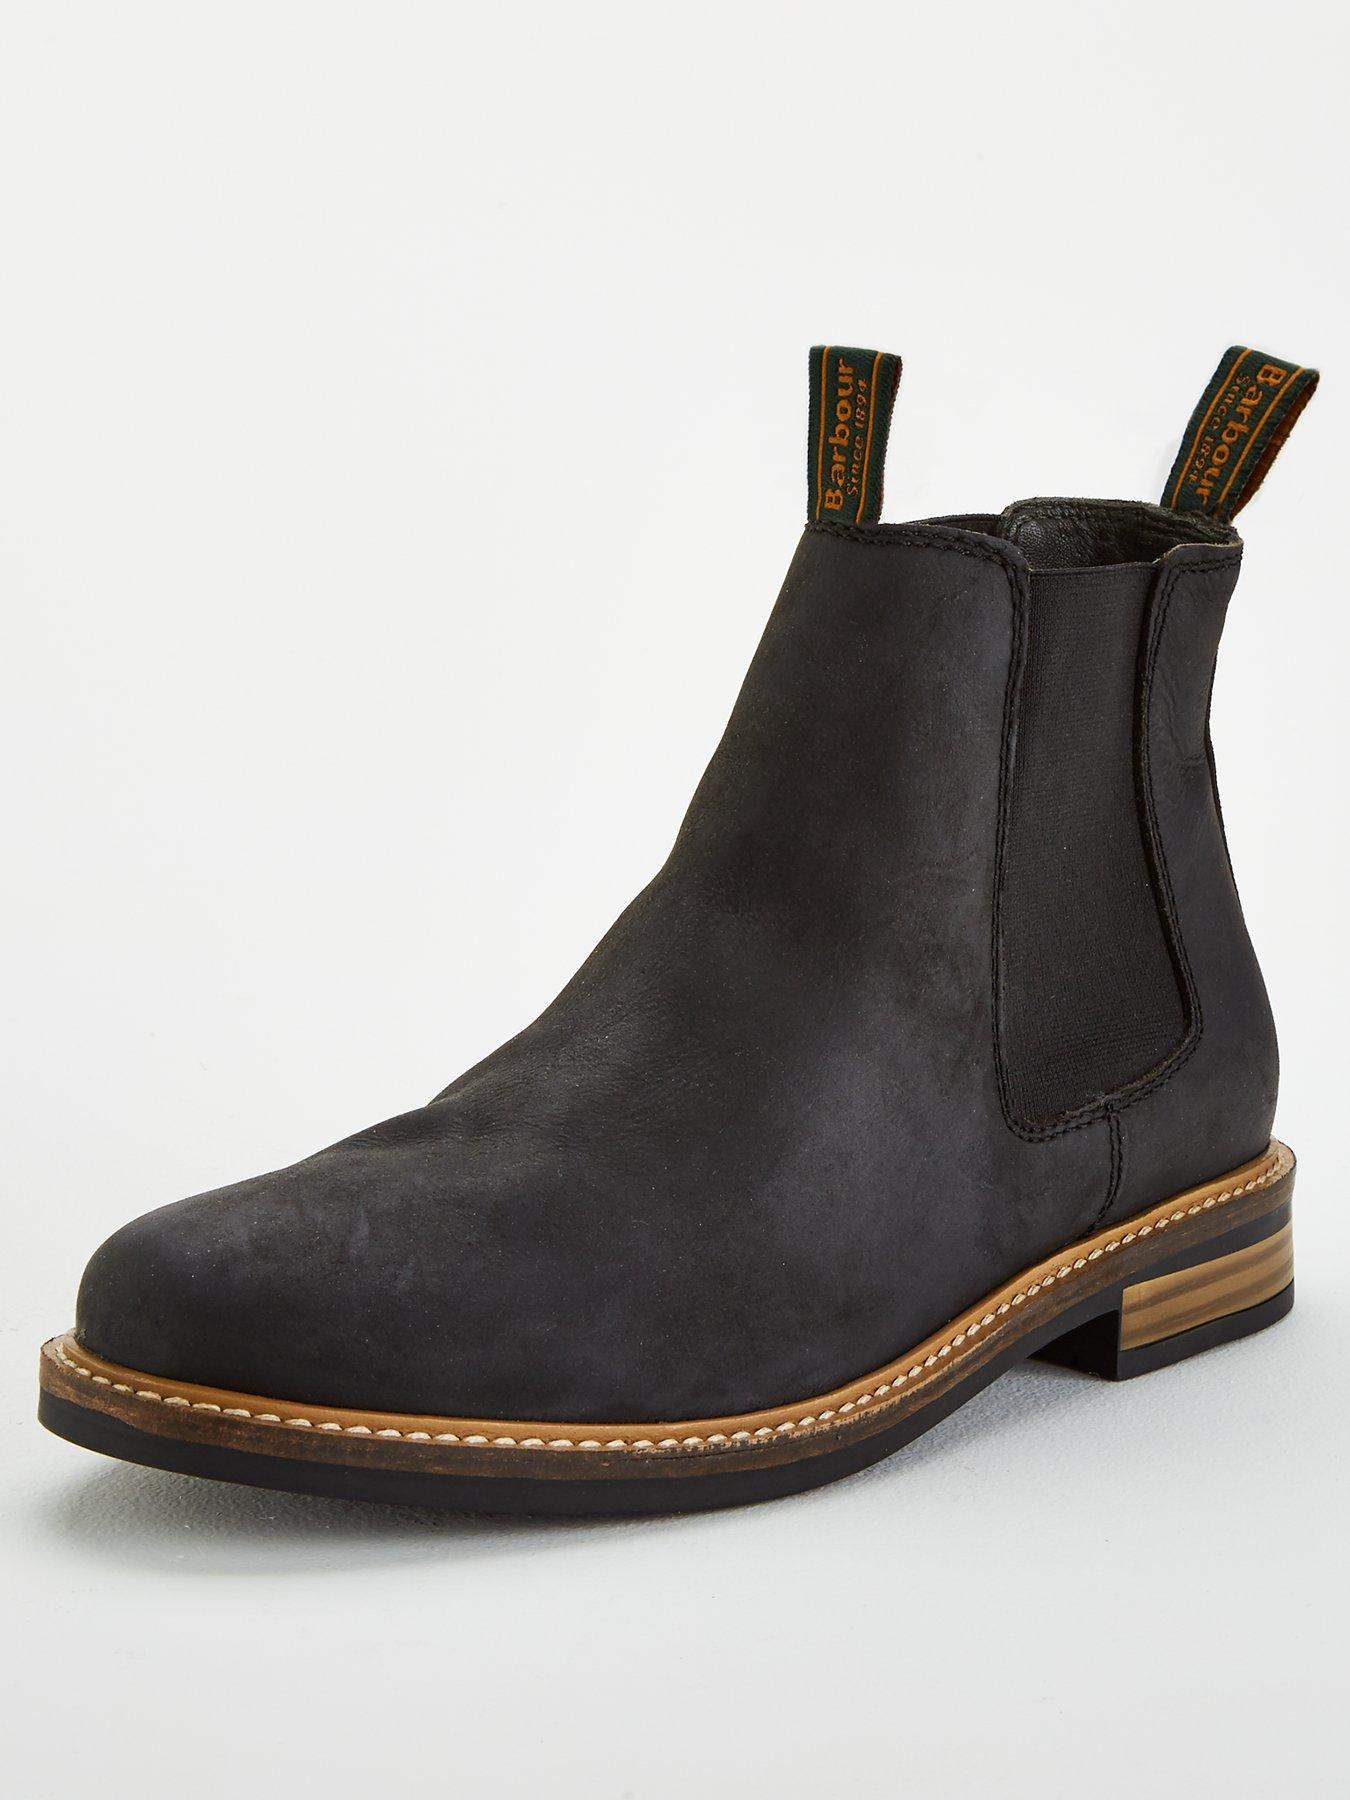 barbour farsley chelsea boots tan